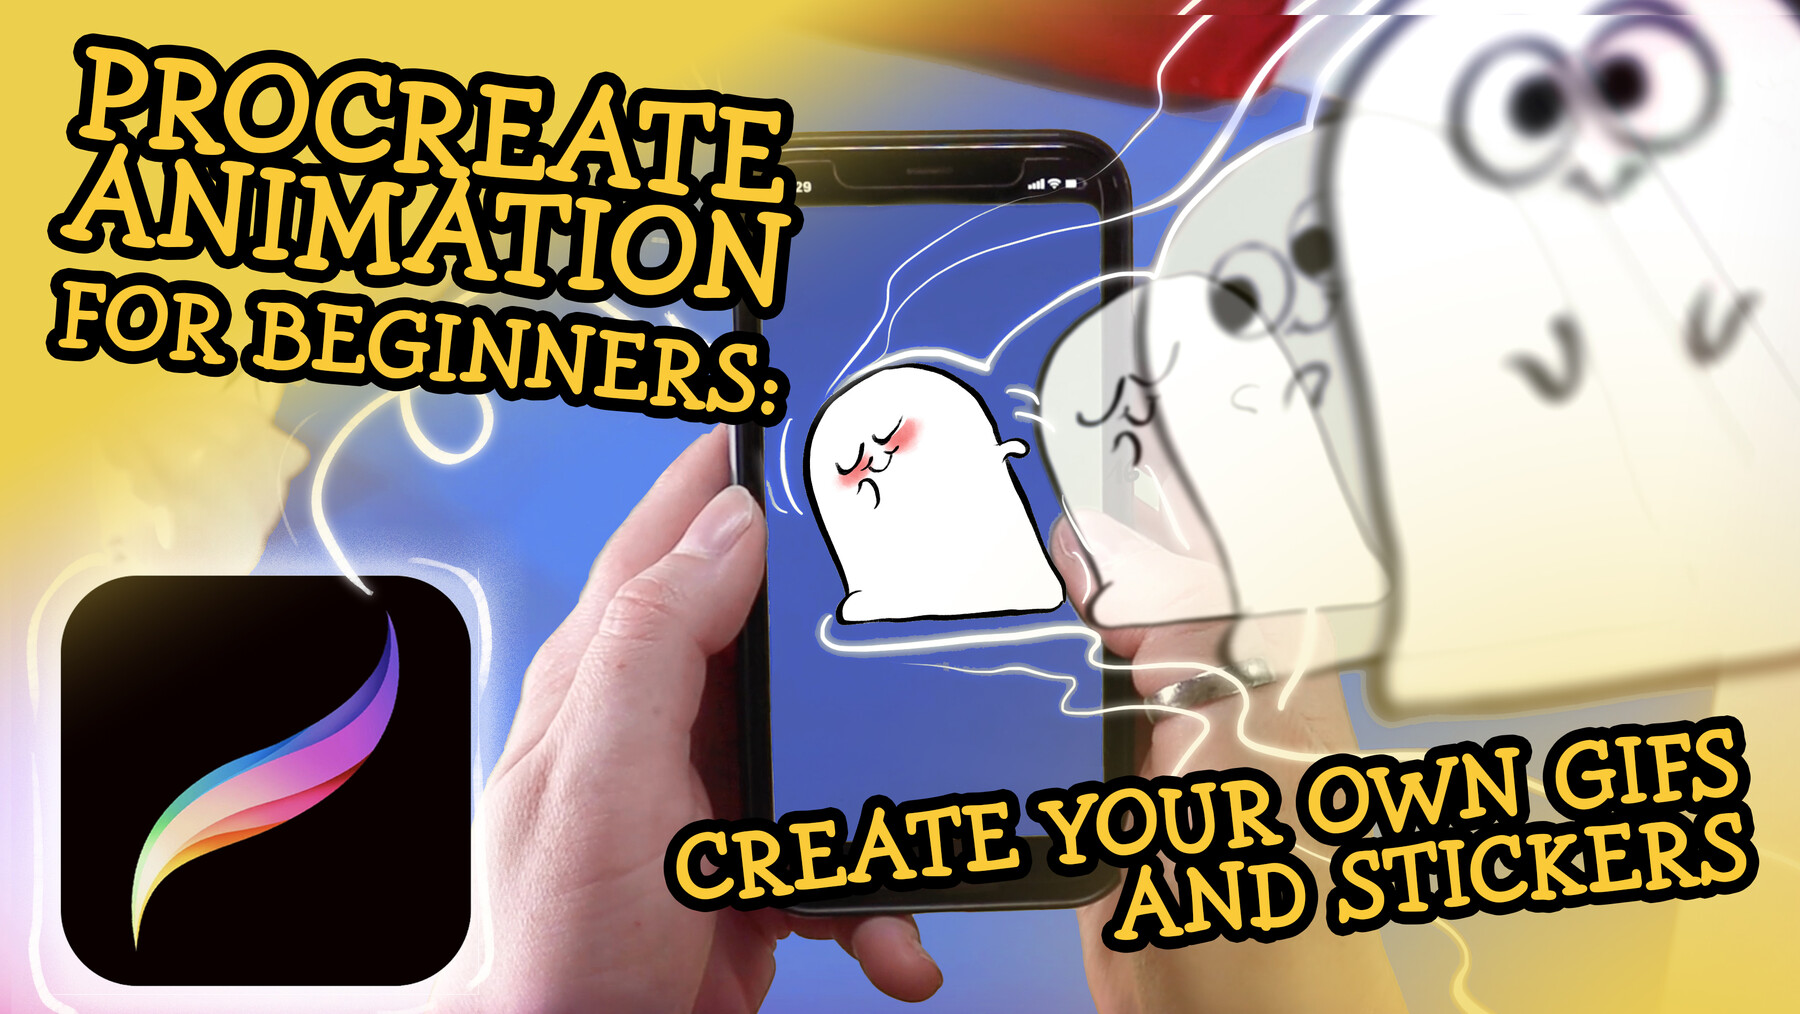 ArtStation - Procreate-Animation for Beginners: Create your own GIFs and  Stickers | Tutorials